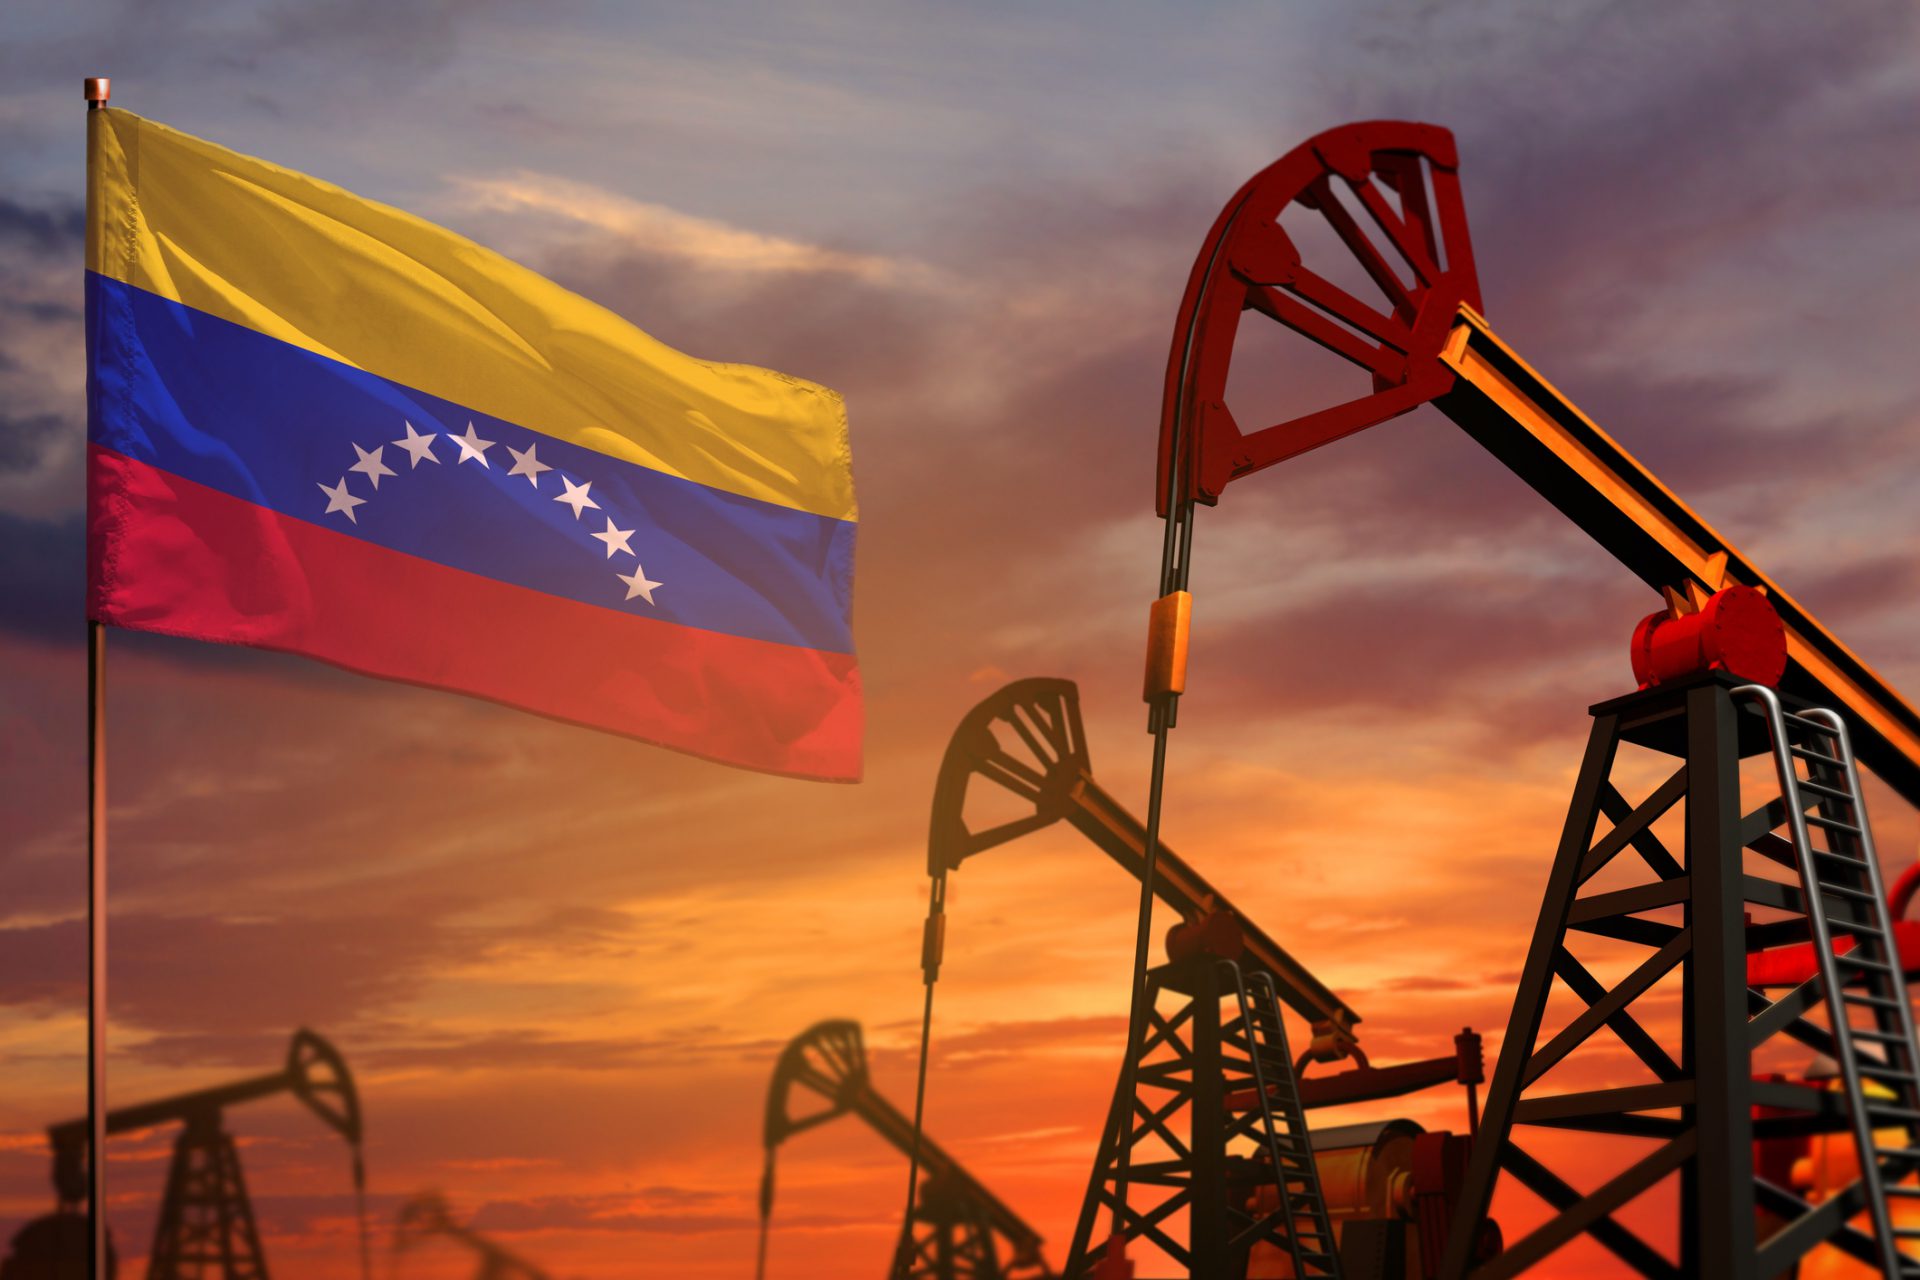 Venezuela oil industry concept. Industrial illustration - Venezuela flag and oil wells with the red and blue sunset or sunrise sky background - 3D illustration